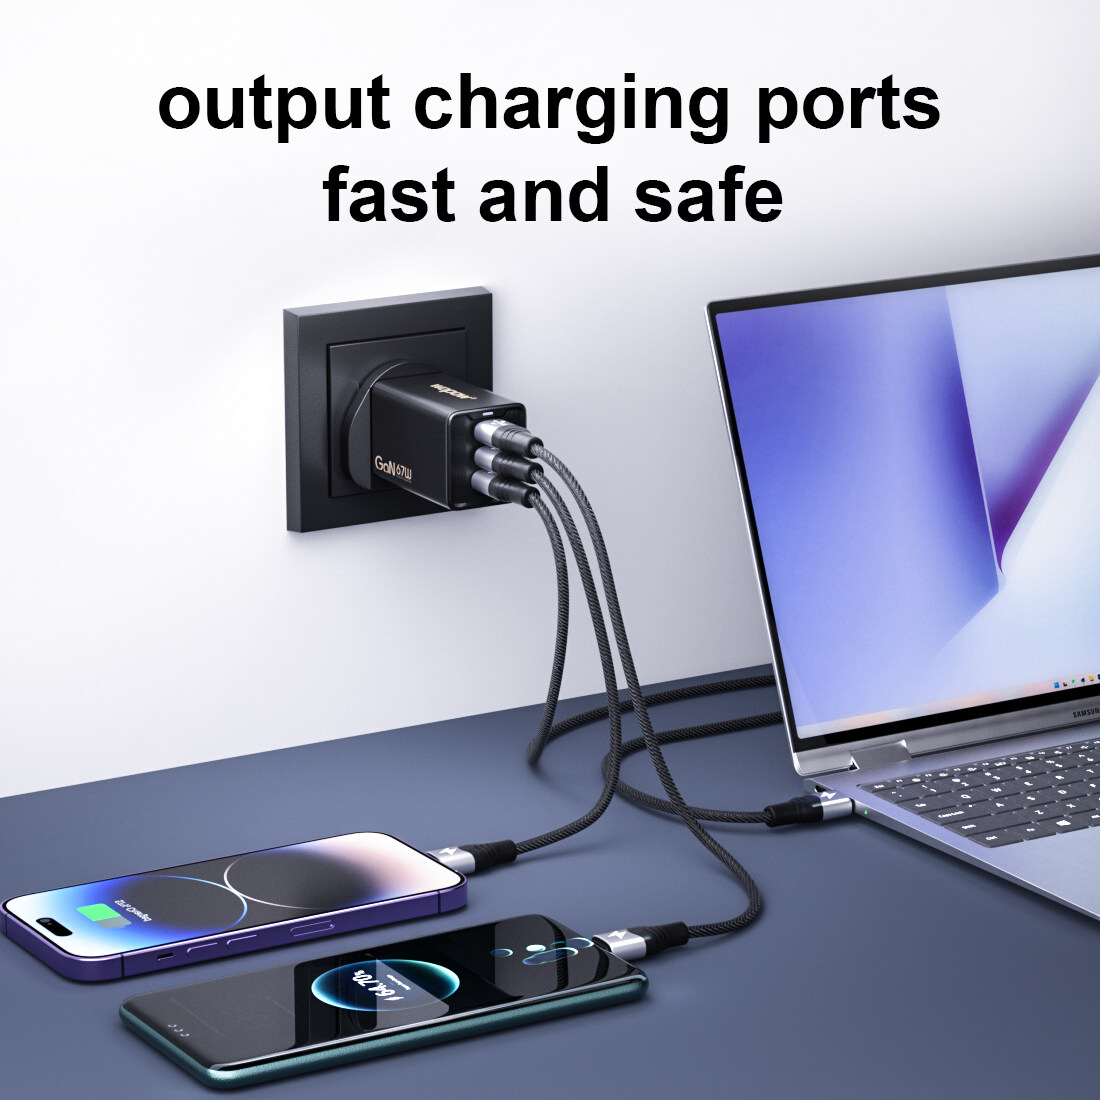 multi device travel charger, wireless charger for travel, wireless charger travel, travel charger md02 export, travel charger md02 china